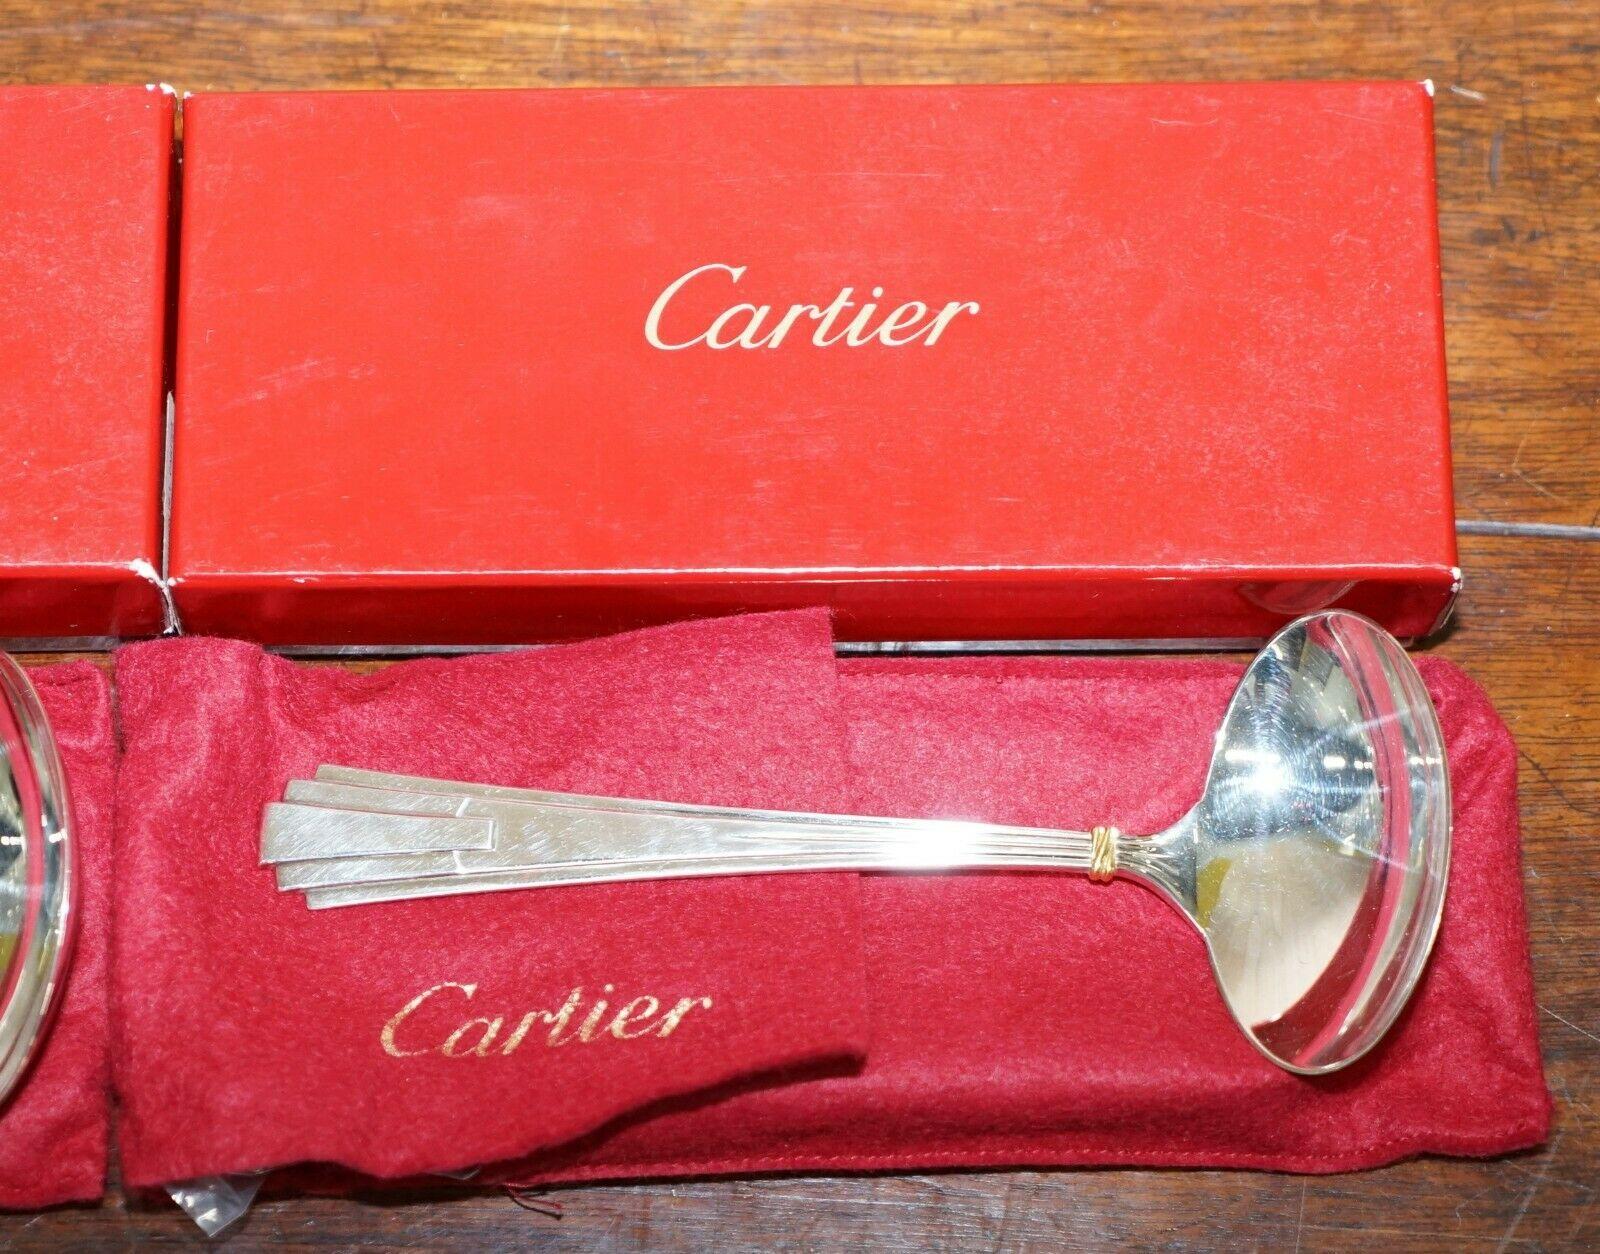 Art Deco Pair of Cartier Solid Sterling Silver and Gold Gravy Ladles